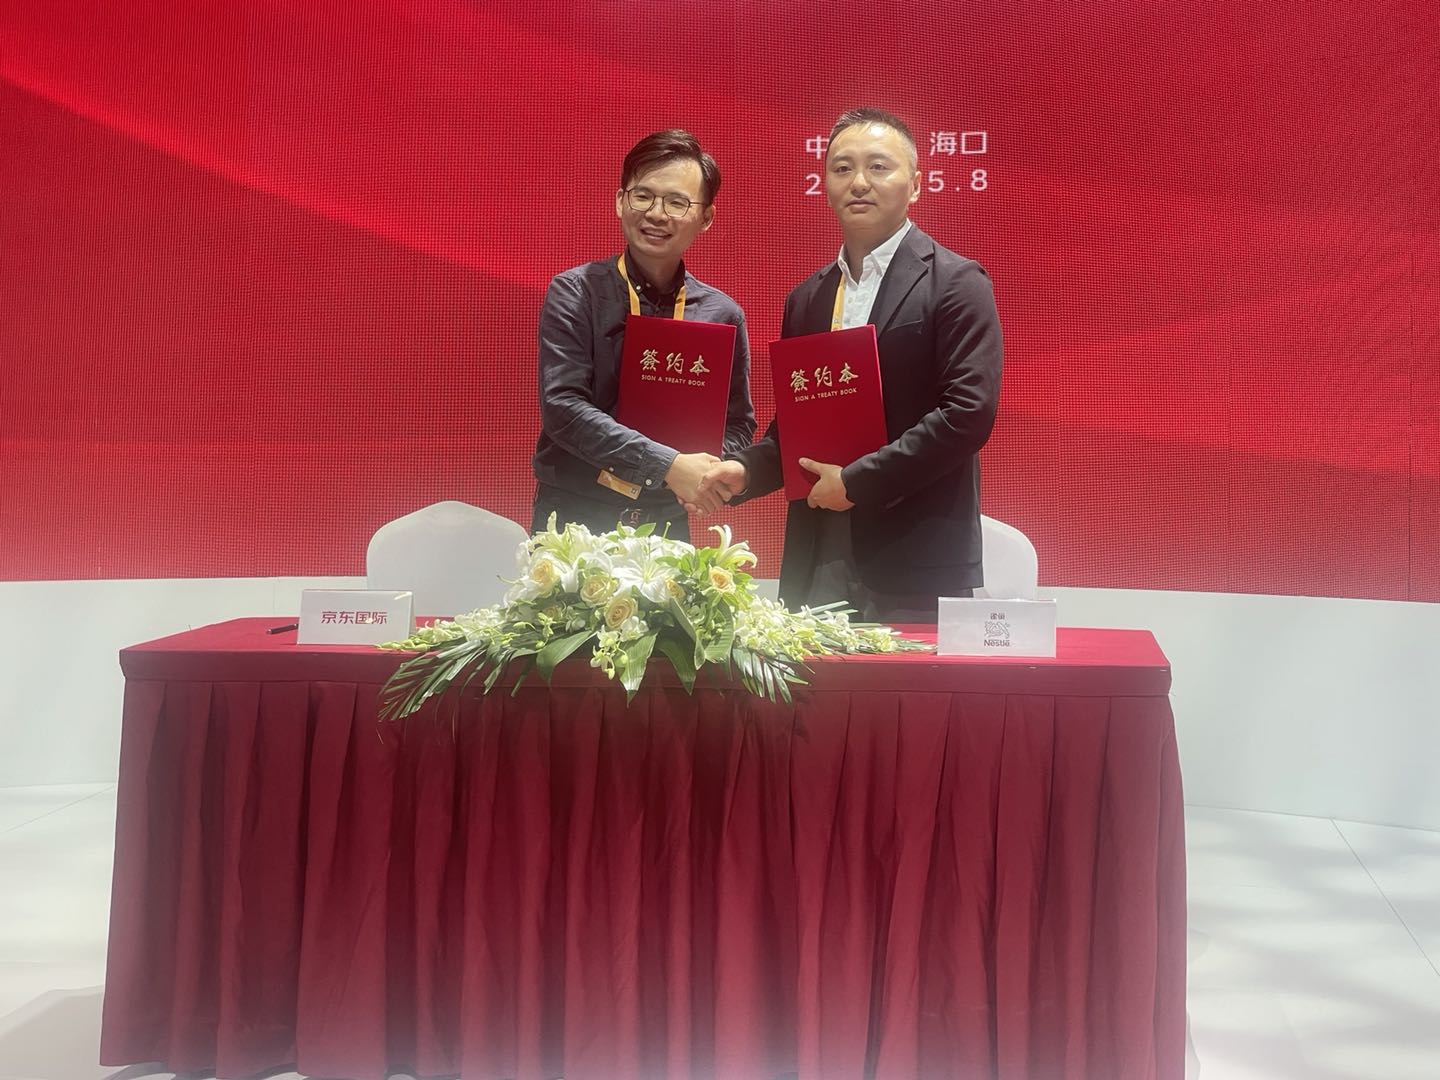 Yongzhi Xie (left), director of JD Worldwide and Wei Tang, Director of e-commerce KA, Nestle